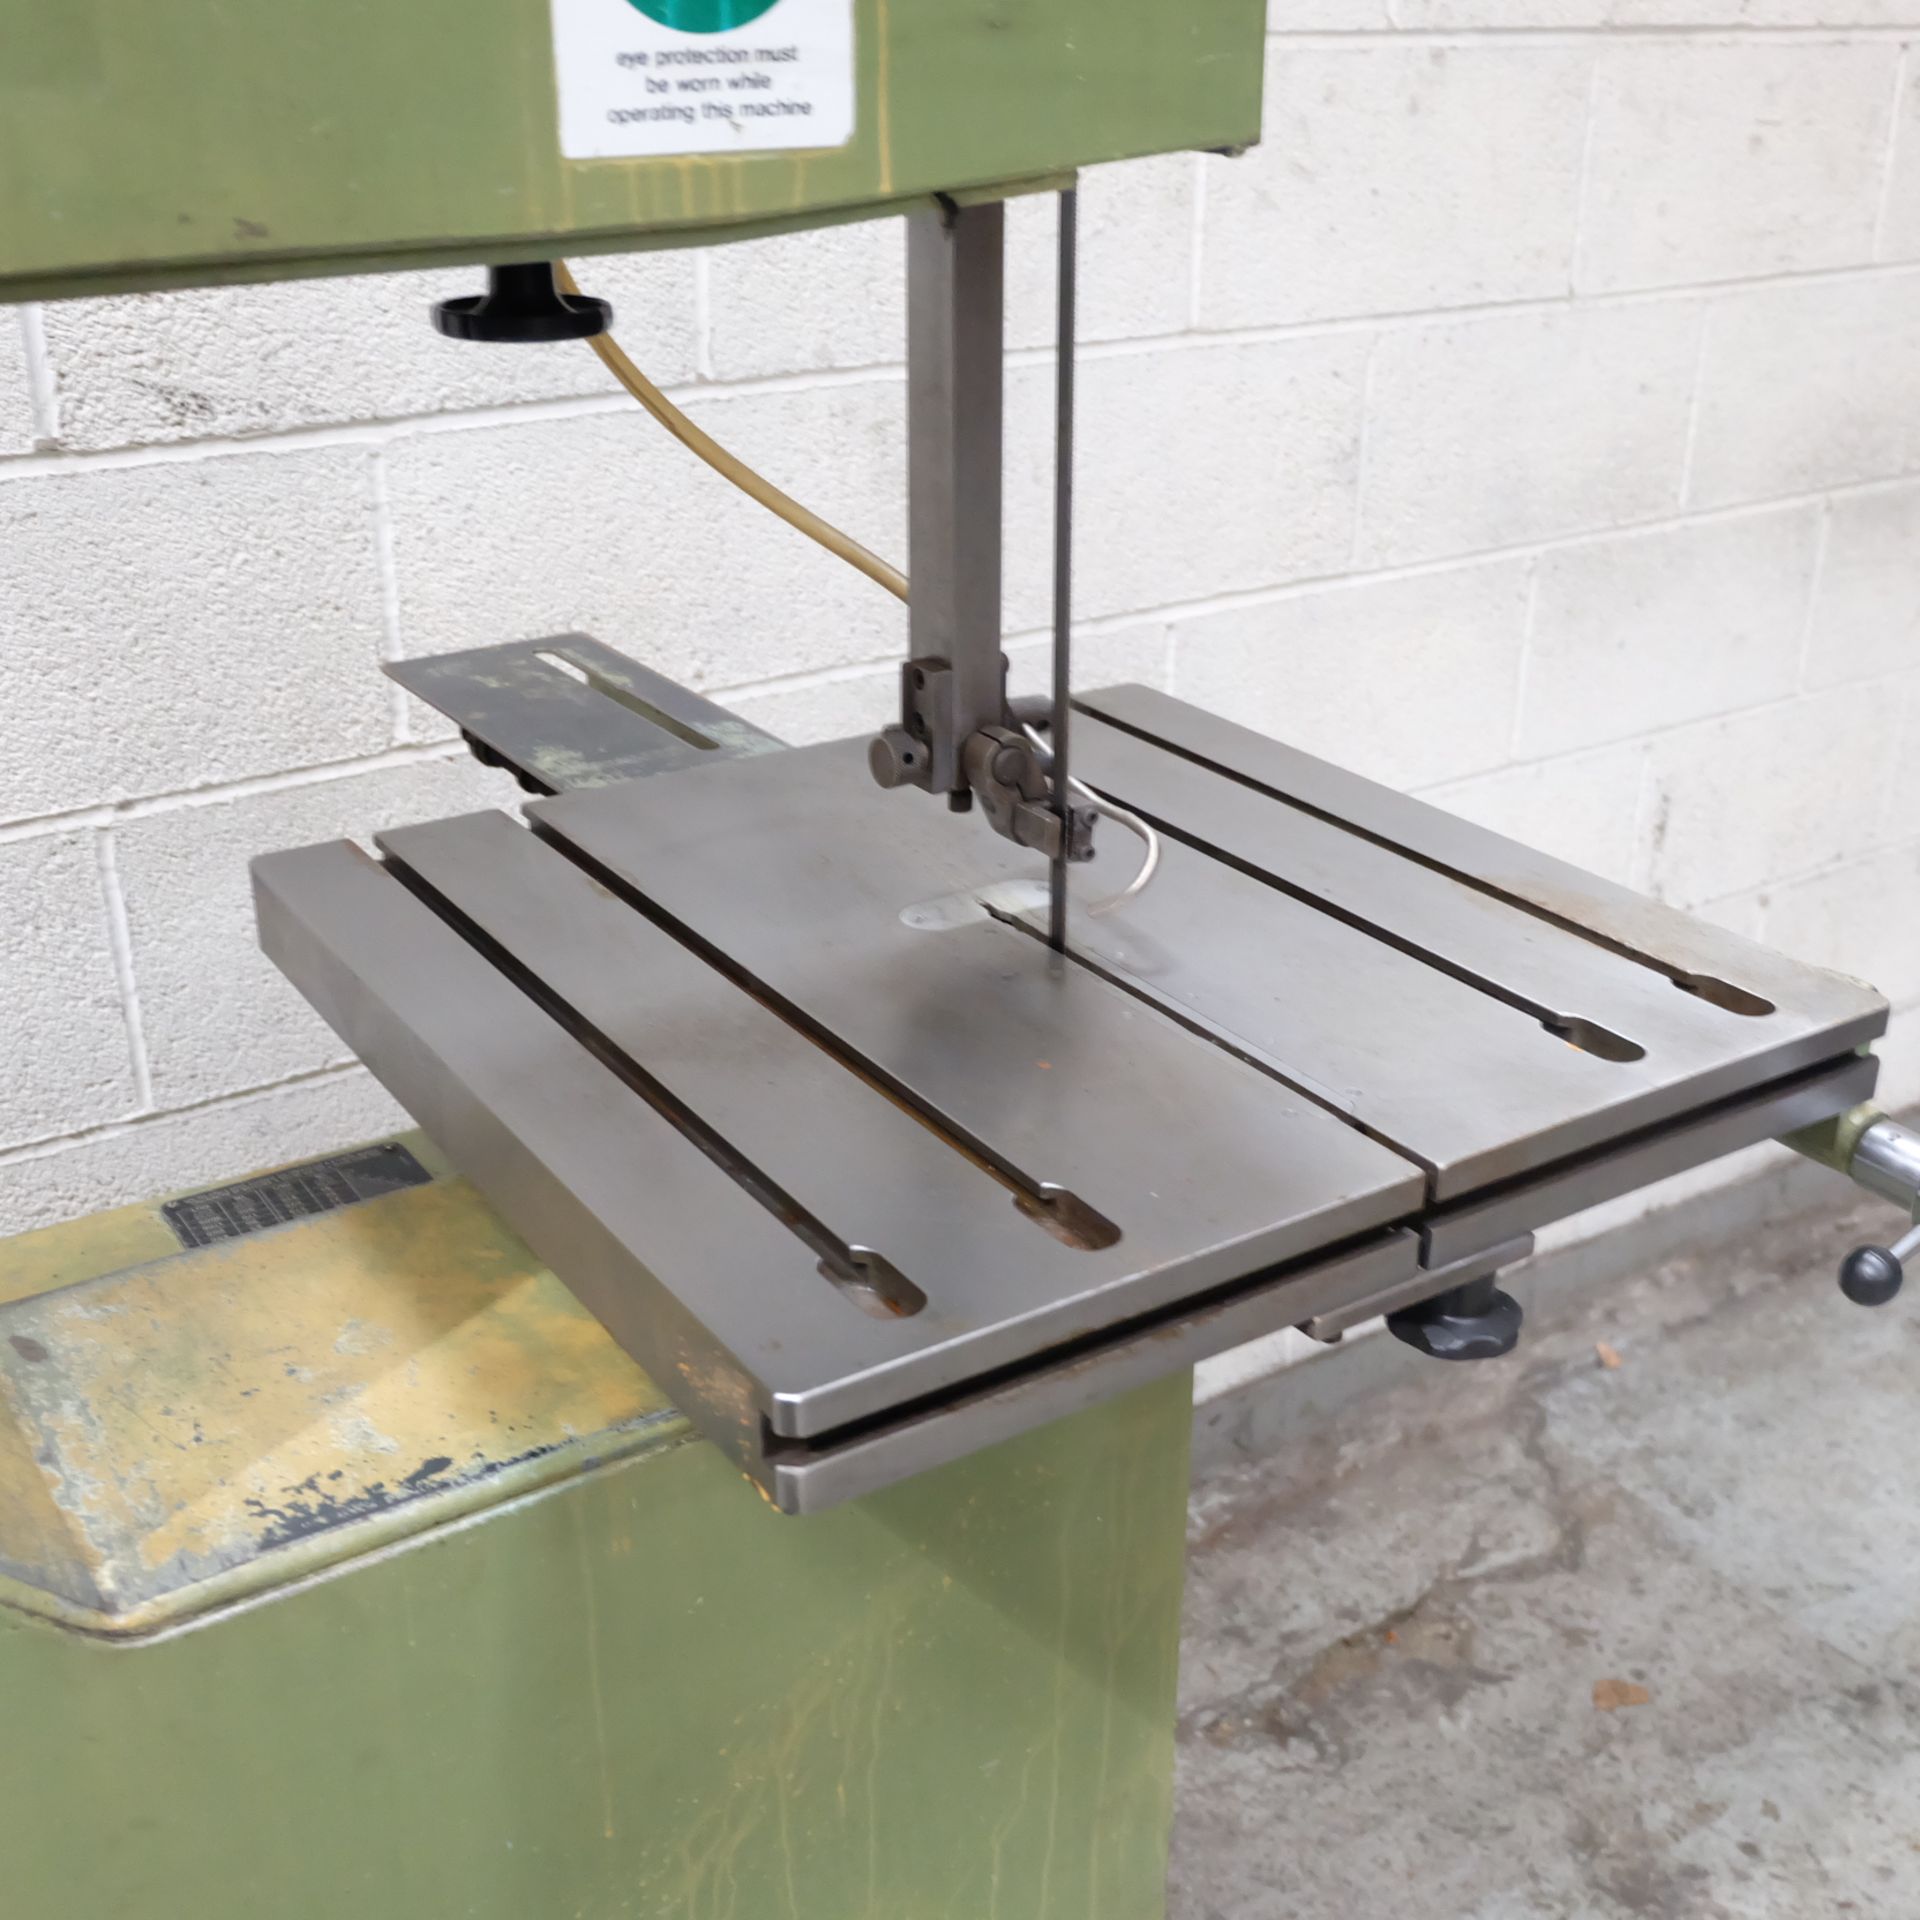 A Startrite 20 RWS Vertical Bandsaw, Table Size 20 - Image 7 of 9